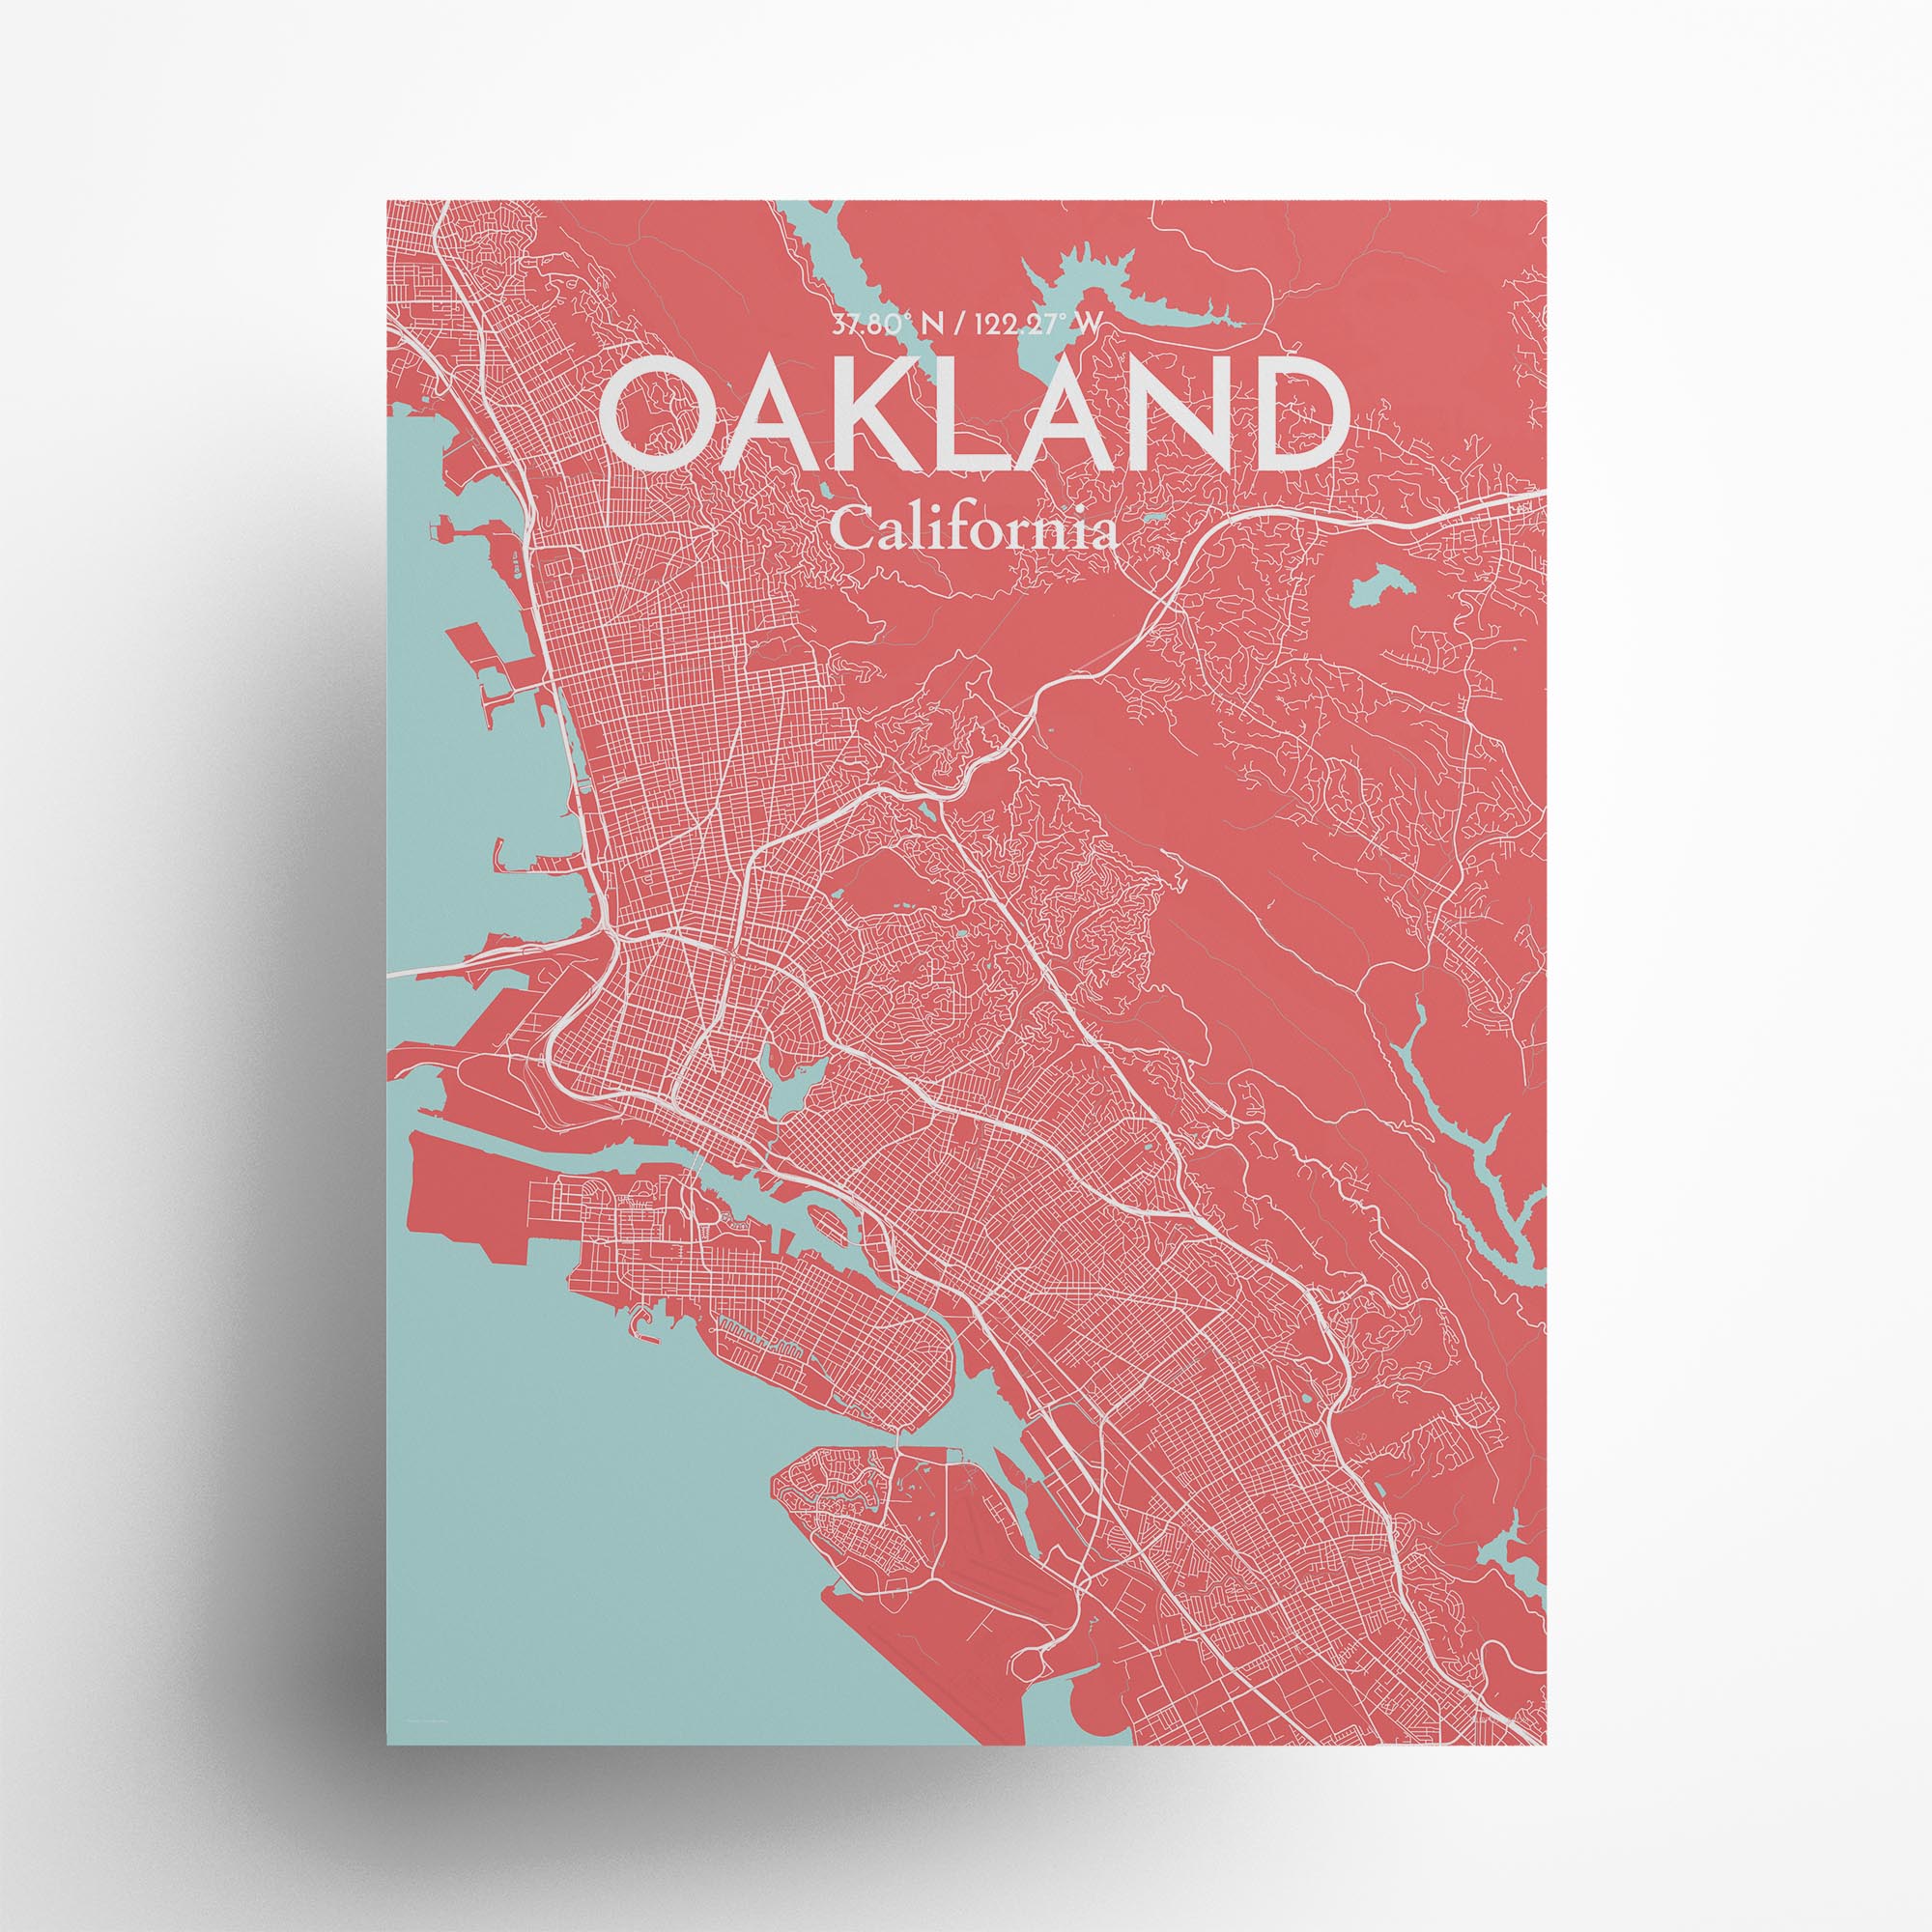 Oakland city map poster in Maritime of size 18" x 24"